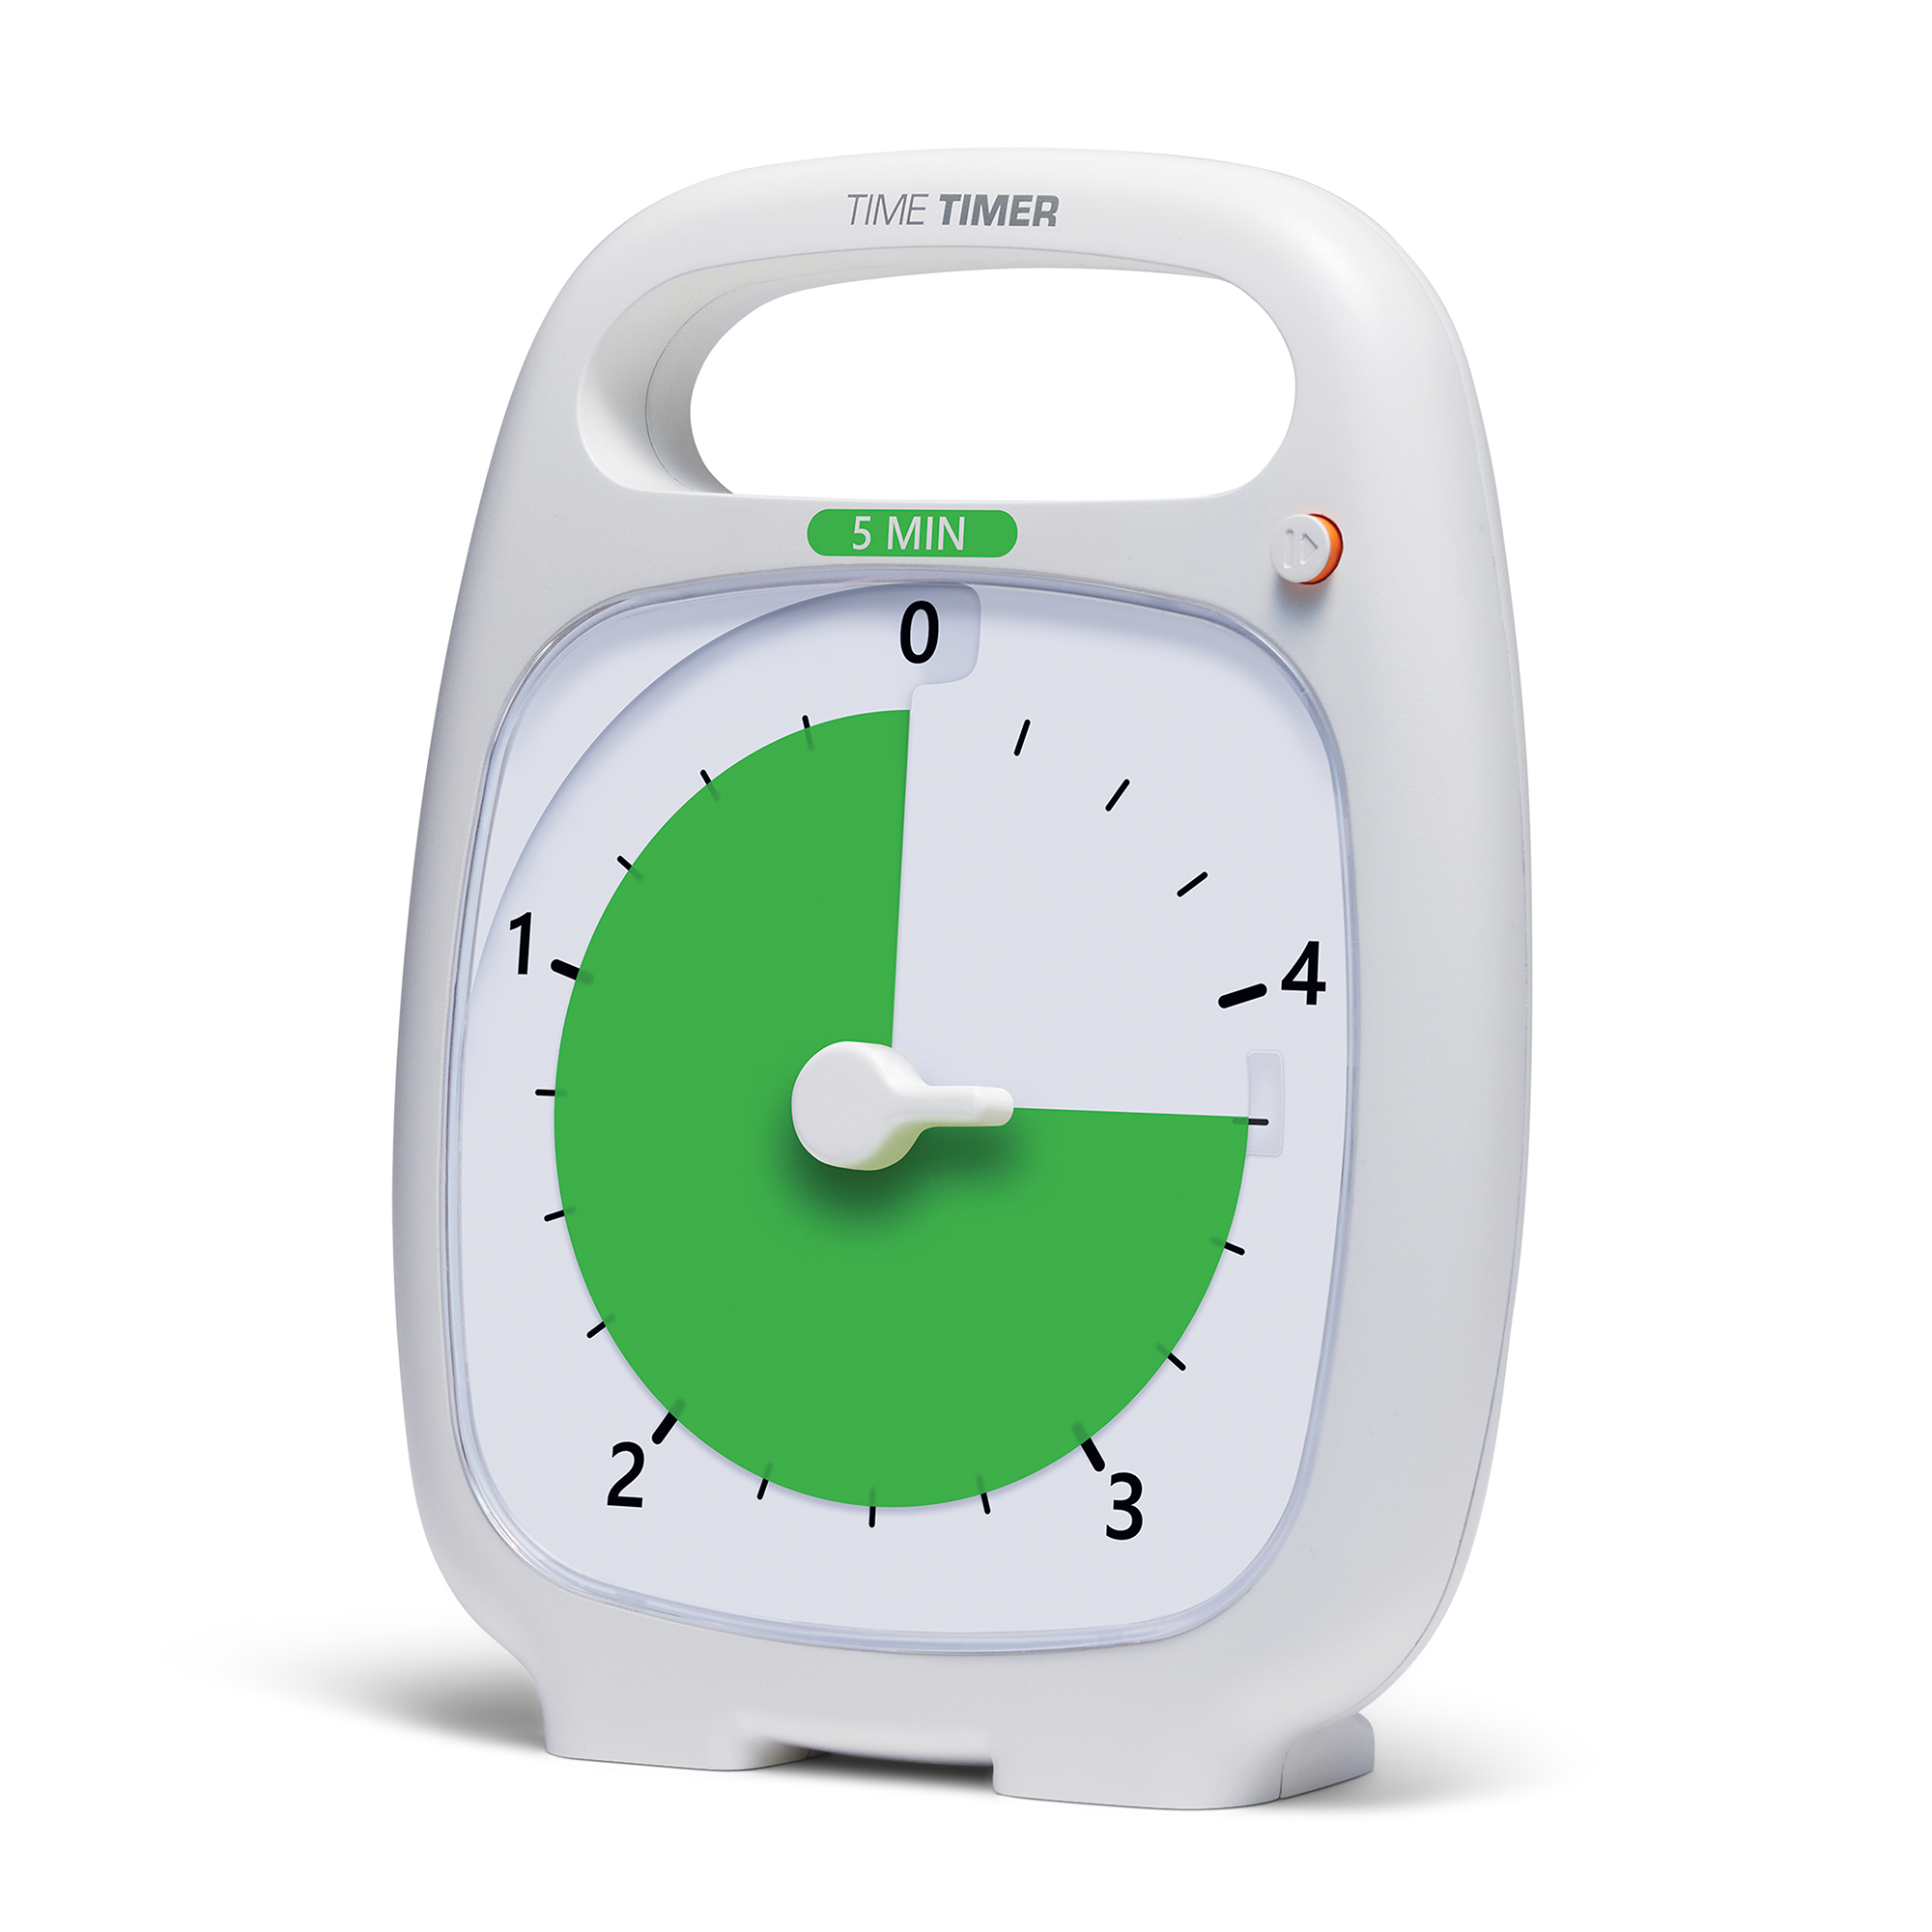 Time Timer PLUS® 5 Minute Timer